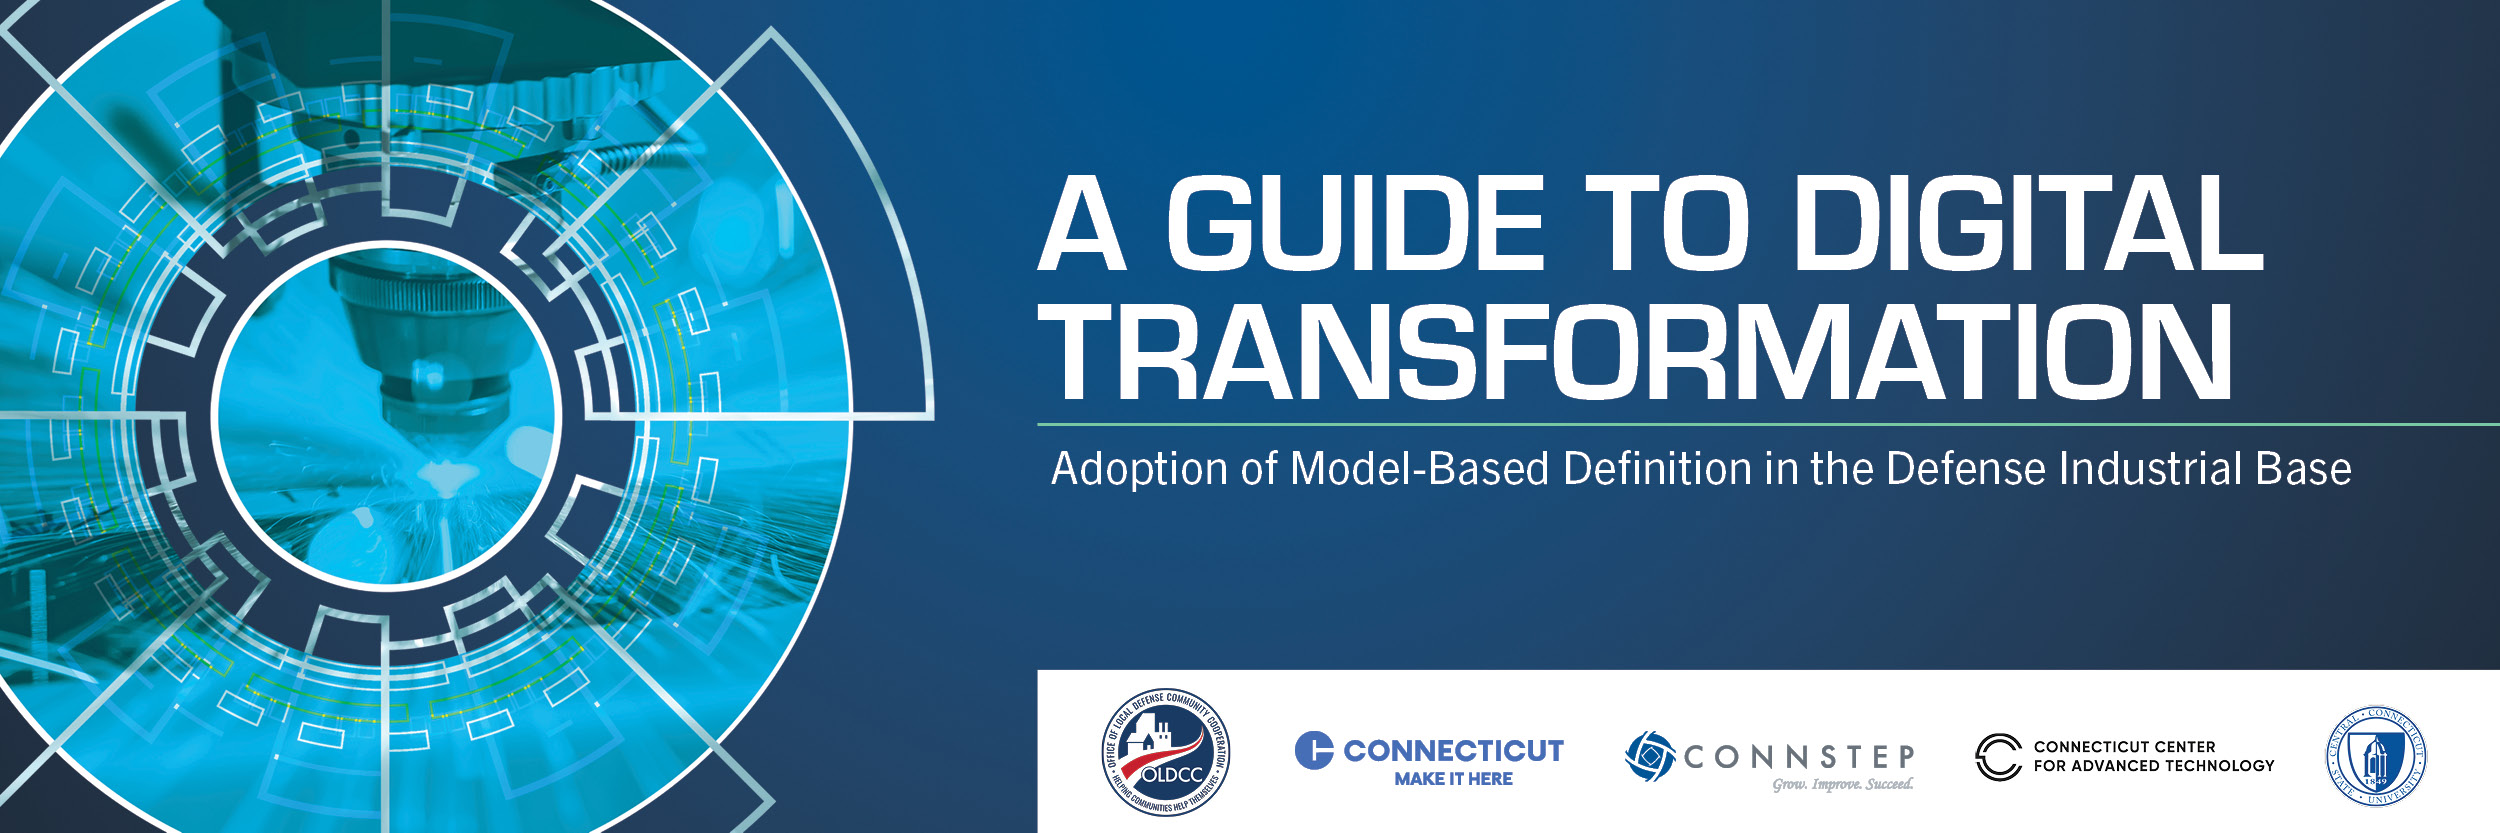 A Guide to Digital Transformation Hosted by CT State Community College Housatonic